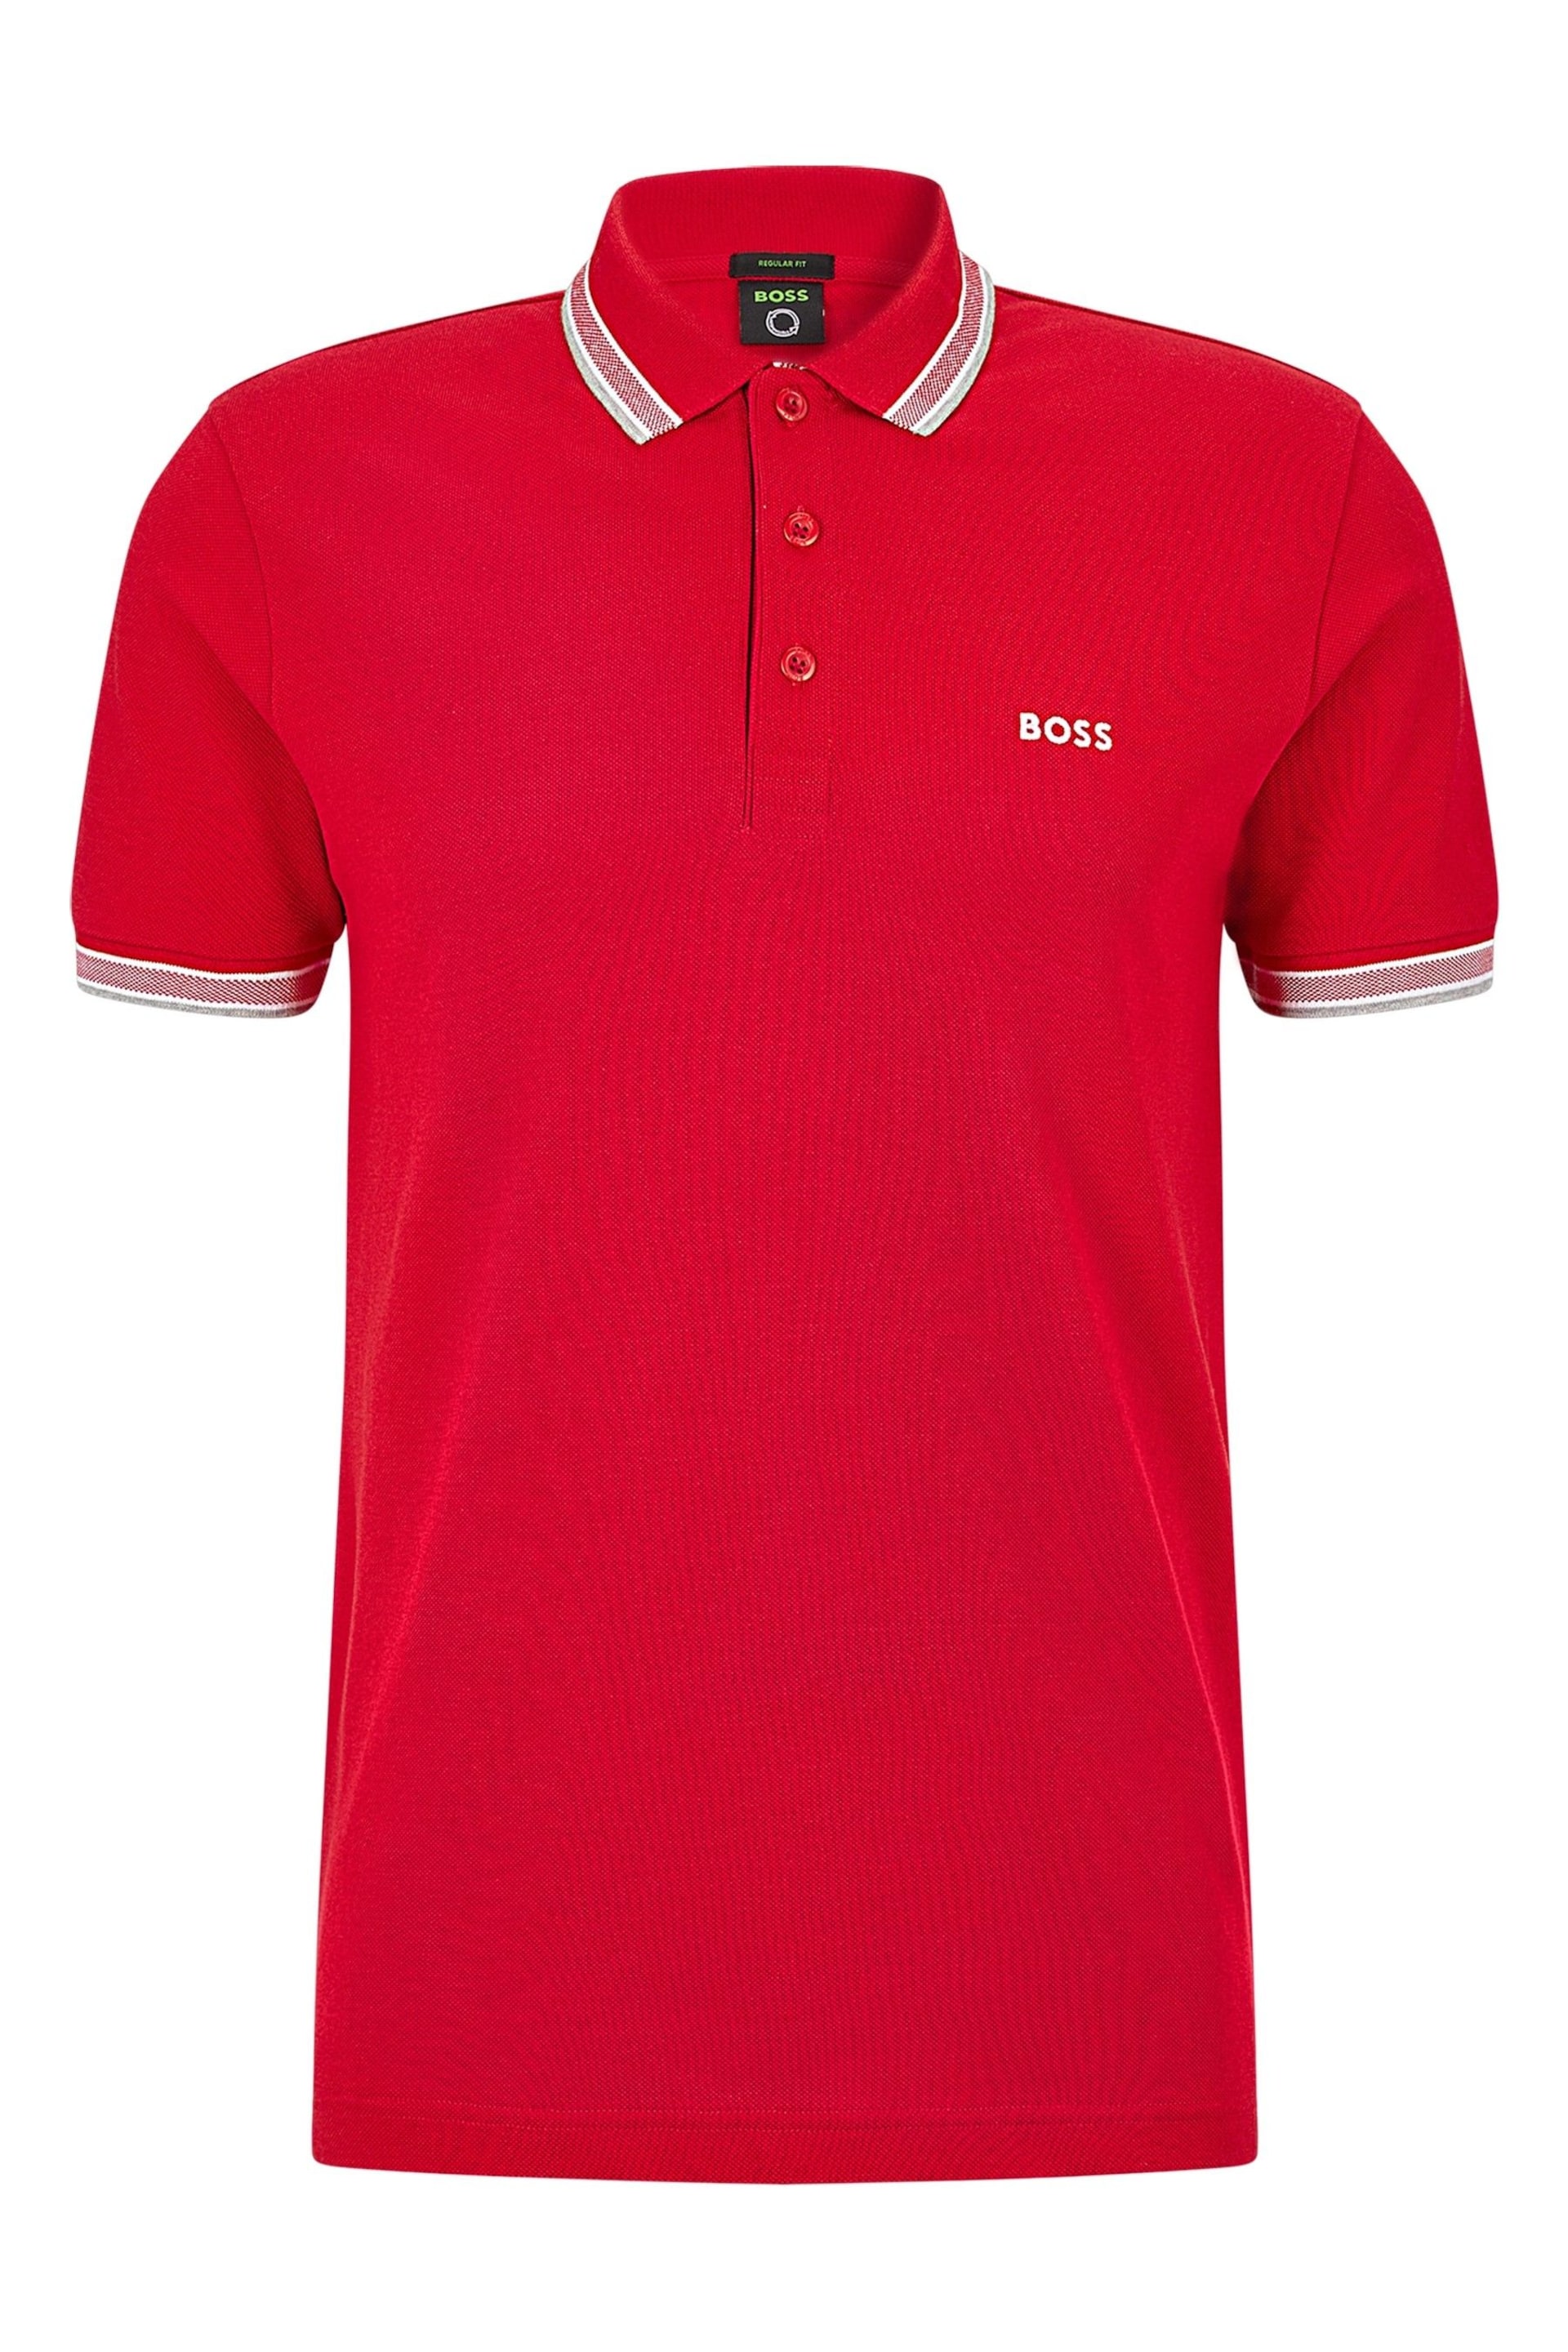 BOSS Red/Grey Tipping Paddy Polo Pink Cream Shirt - Image 5 of 5